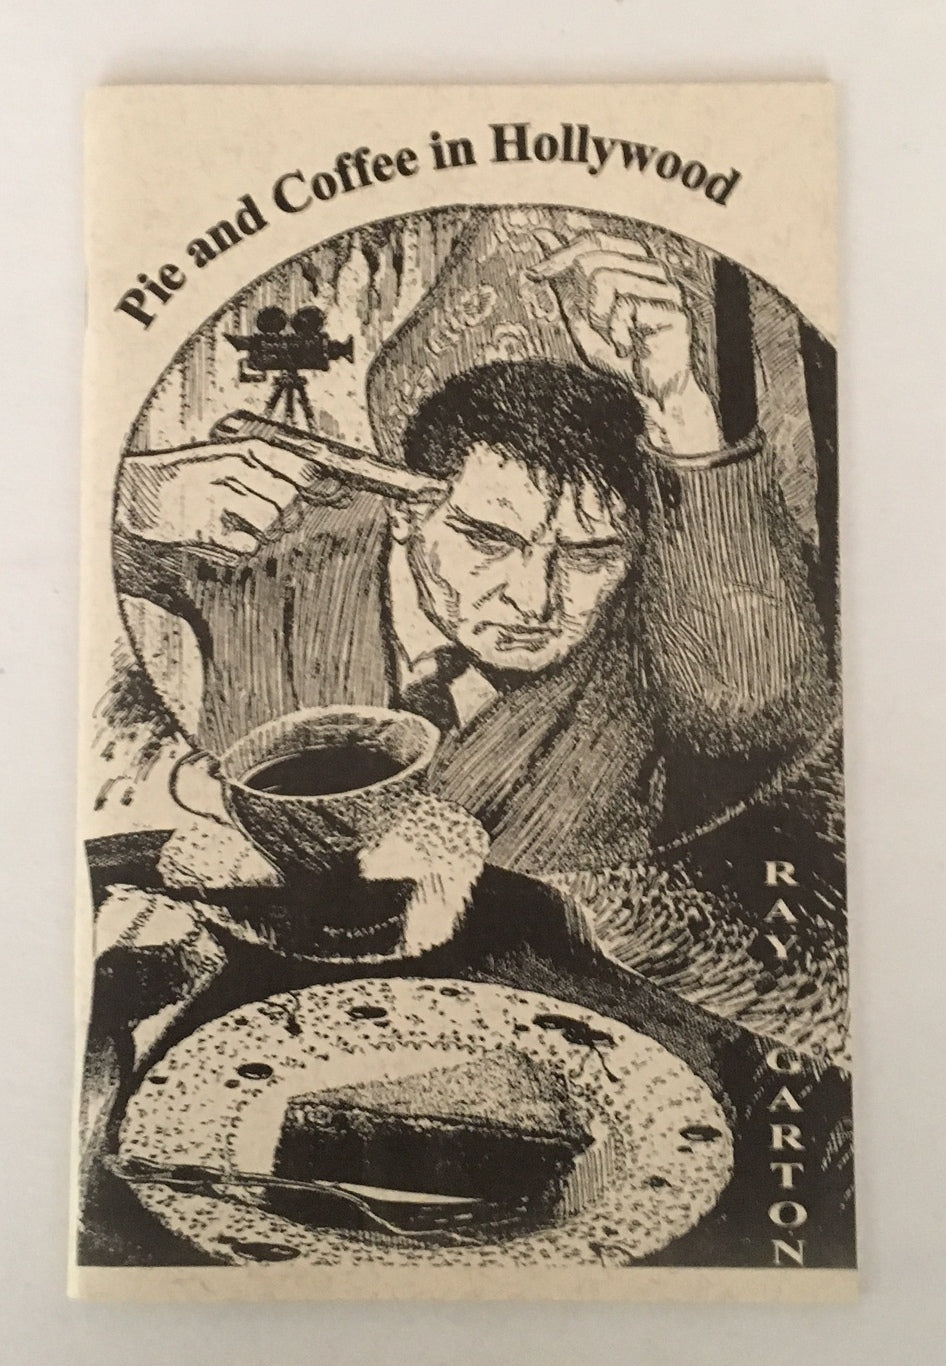 Ray Garton - Pie And Coffee In Hollywood (Signed/# Chapbook - Camelot Books)